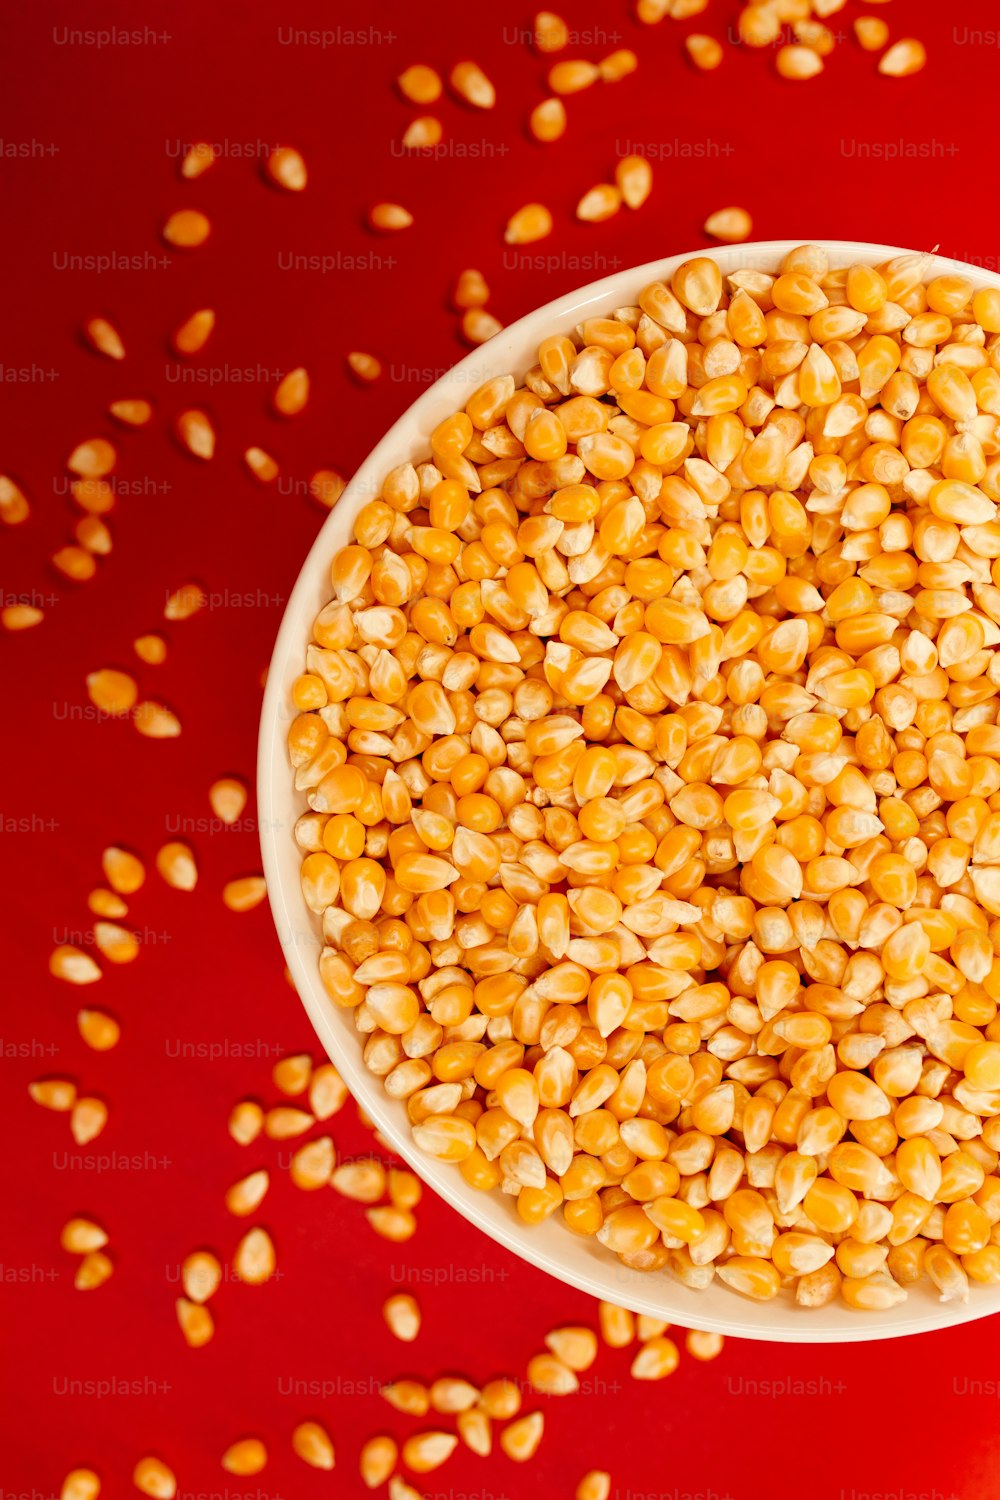 a white bowl filled with corn kernels on a red surface